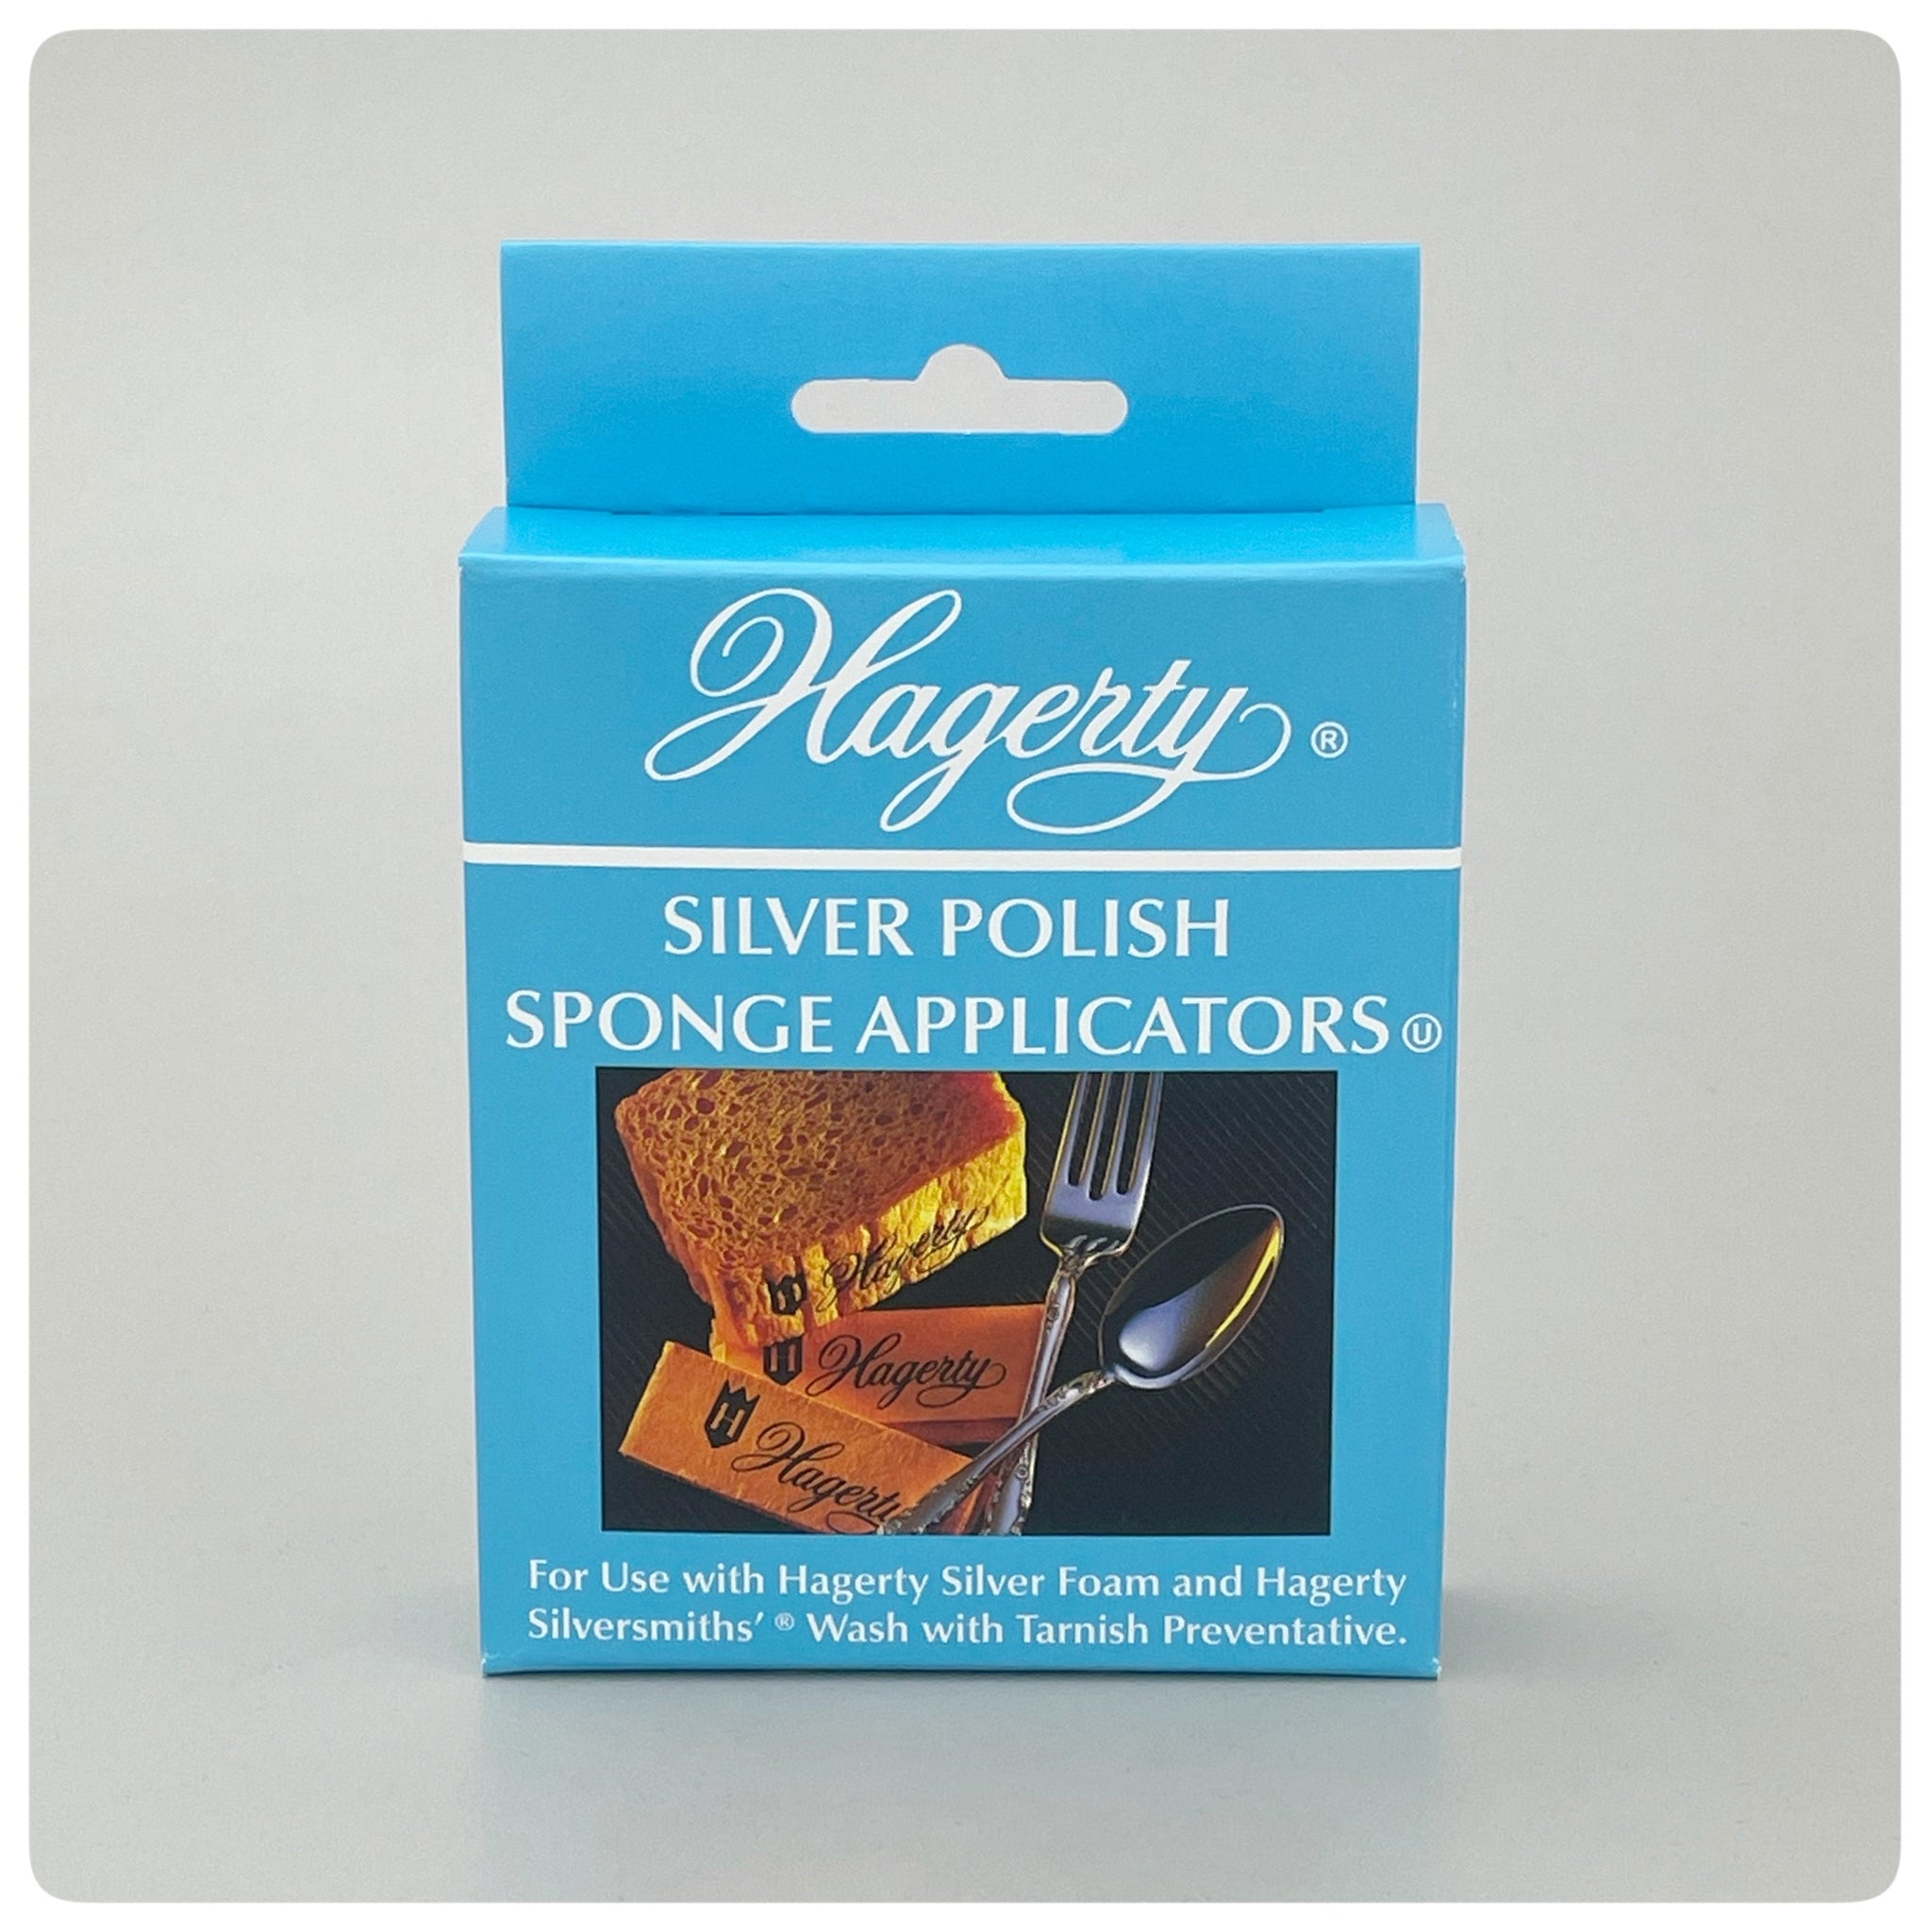 Hagerty Silver Foam for Jewelry